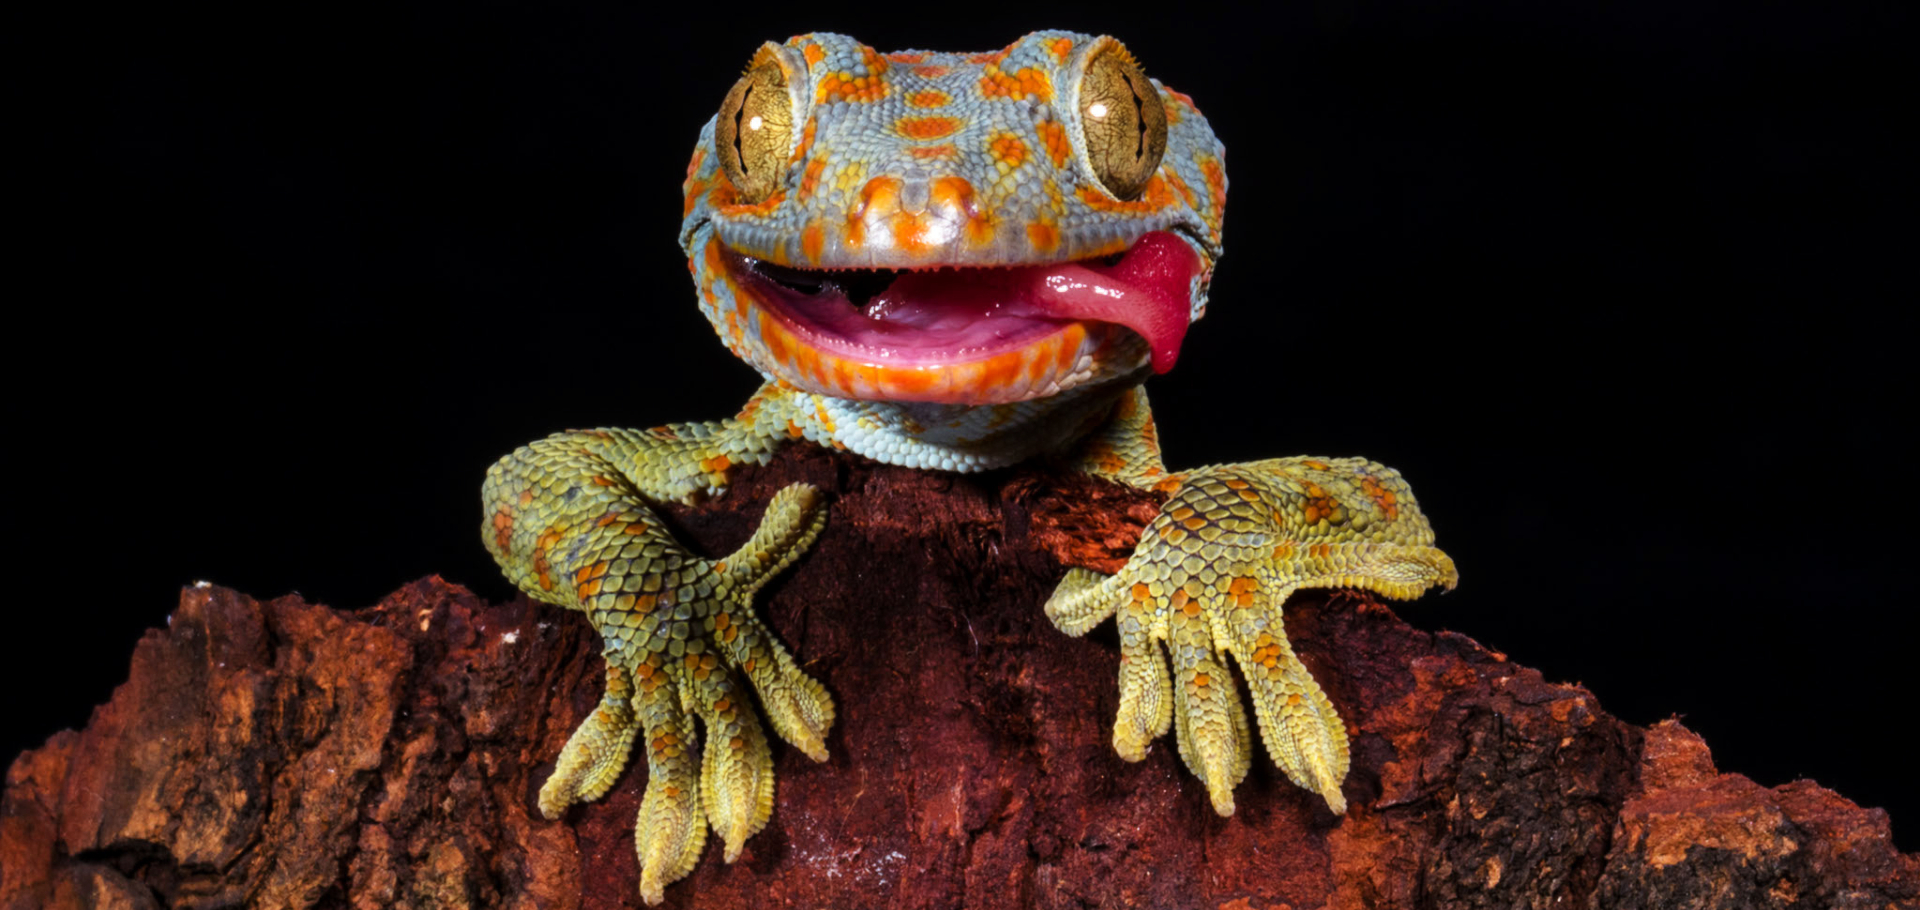 8 Pet Lizard Types for Reptile Lovers